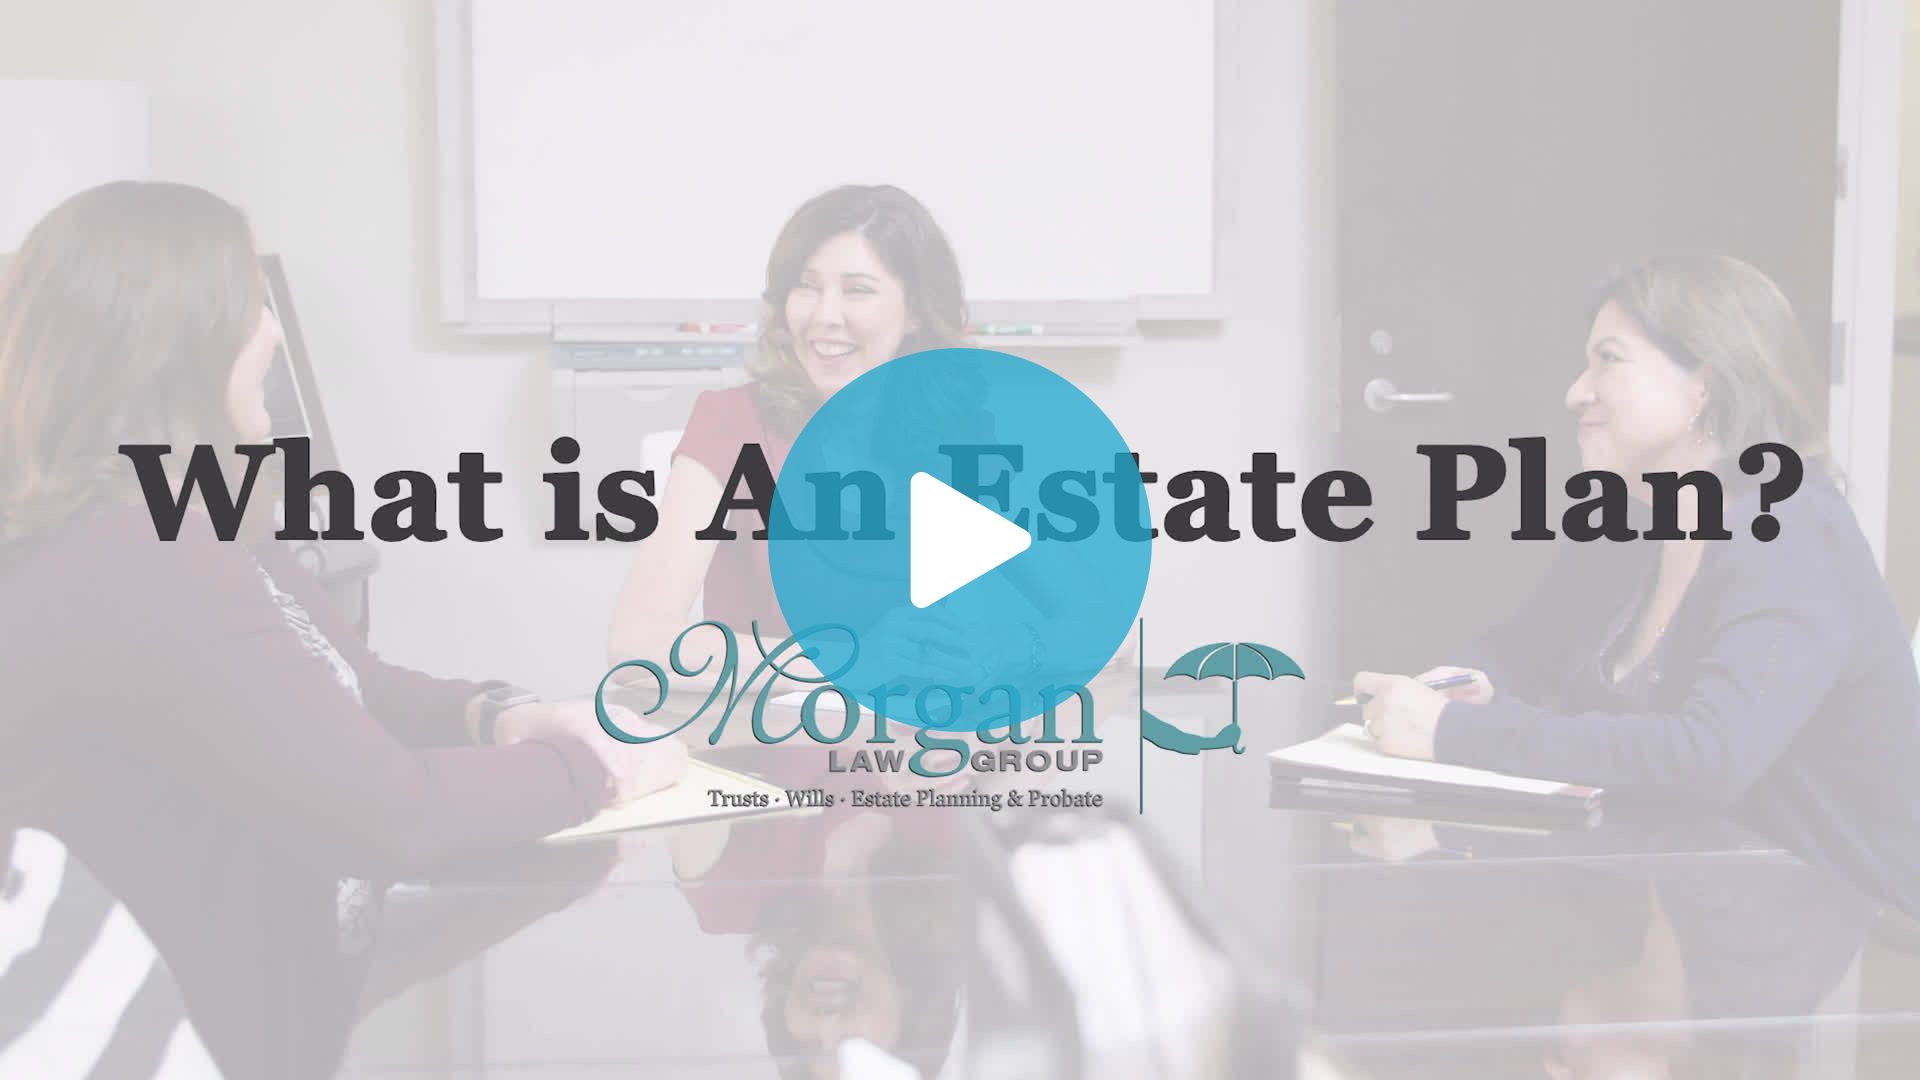 3. What Is an Estate Plan